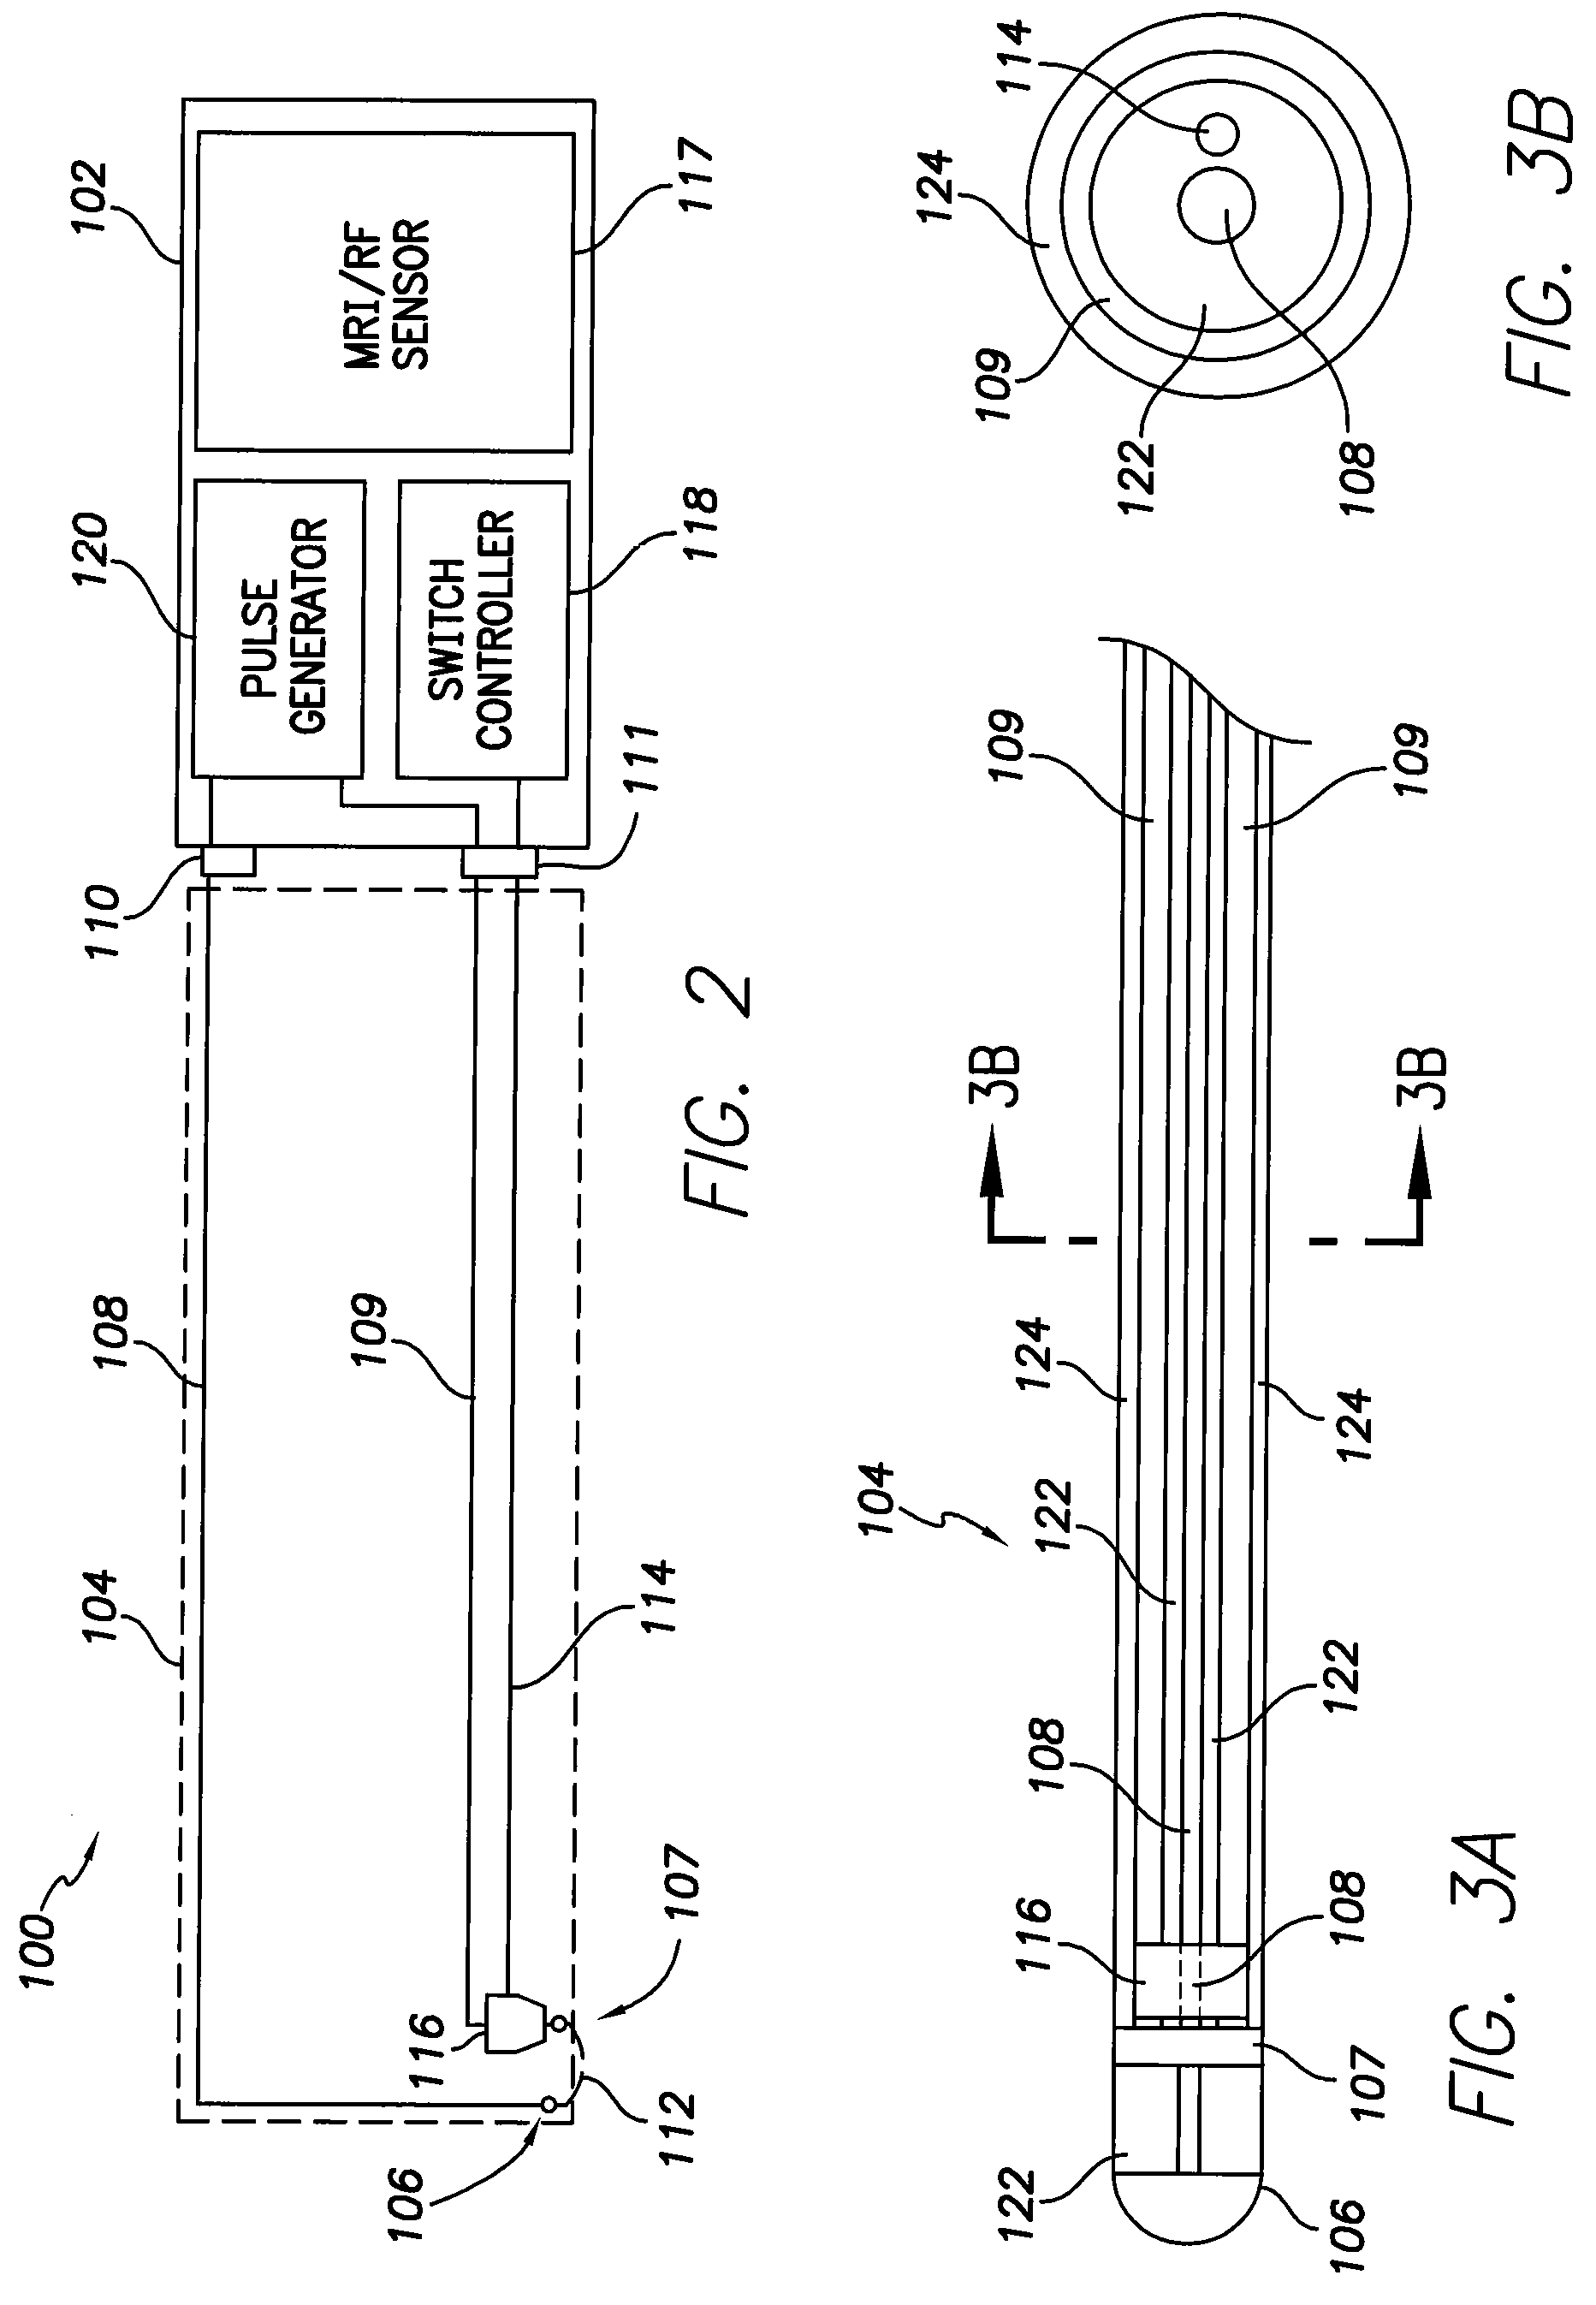 Systems and Methods for Disconnecting Electrodes of Leads of Implantable Medical Devices During an MRI to Reduce Lead Heating